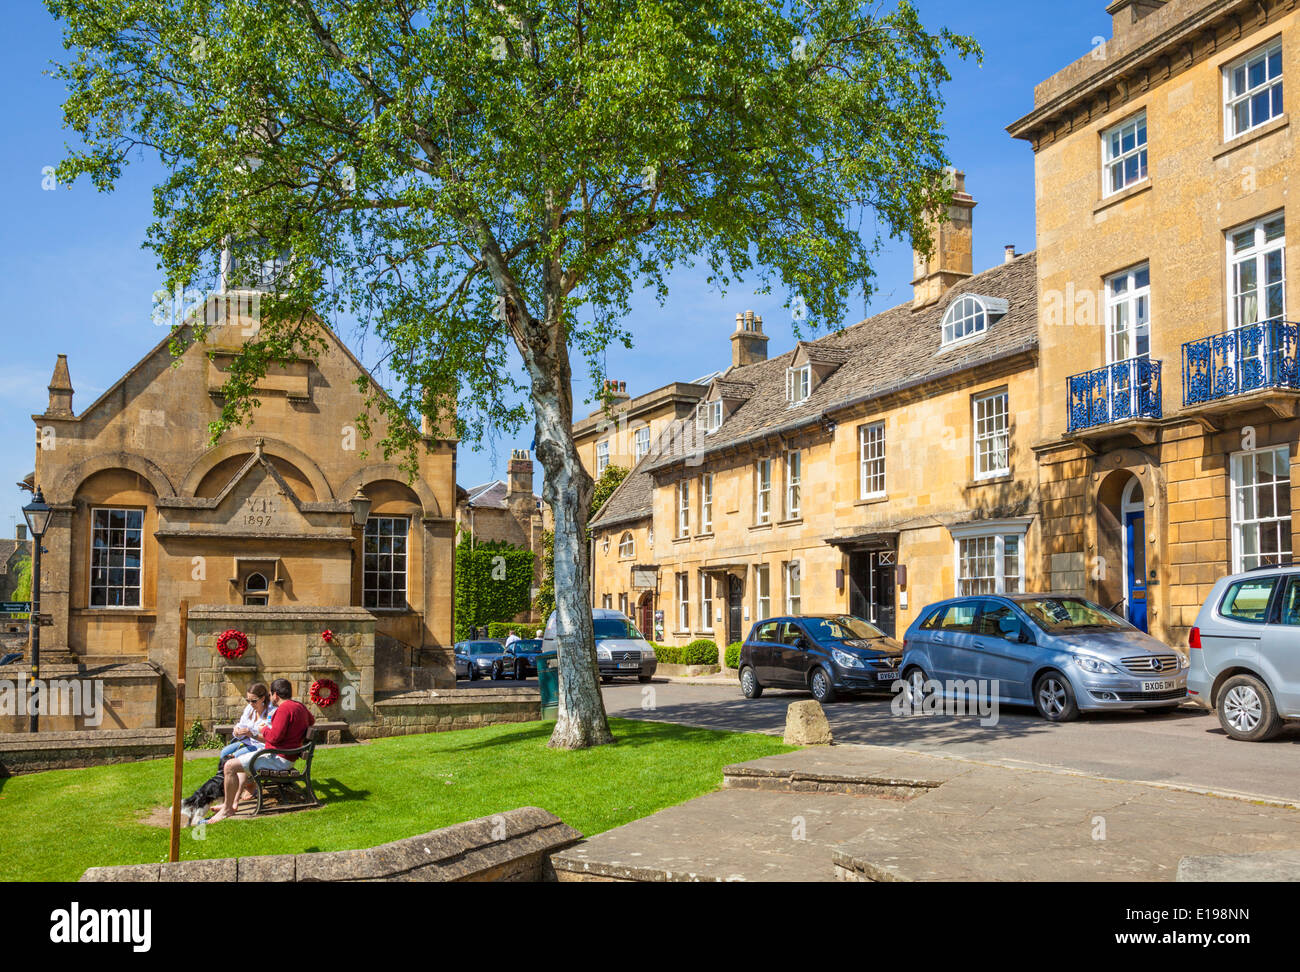 cotswolds village of Chipping Campden High Street with market hall Chipping Campden, The Cotswolds Gloucestershire England UK GB Europe Stock Photo